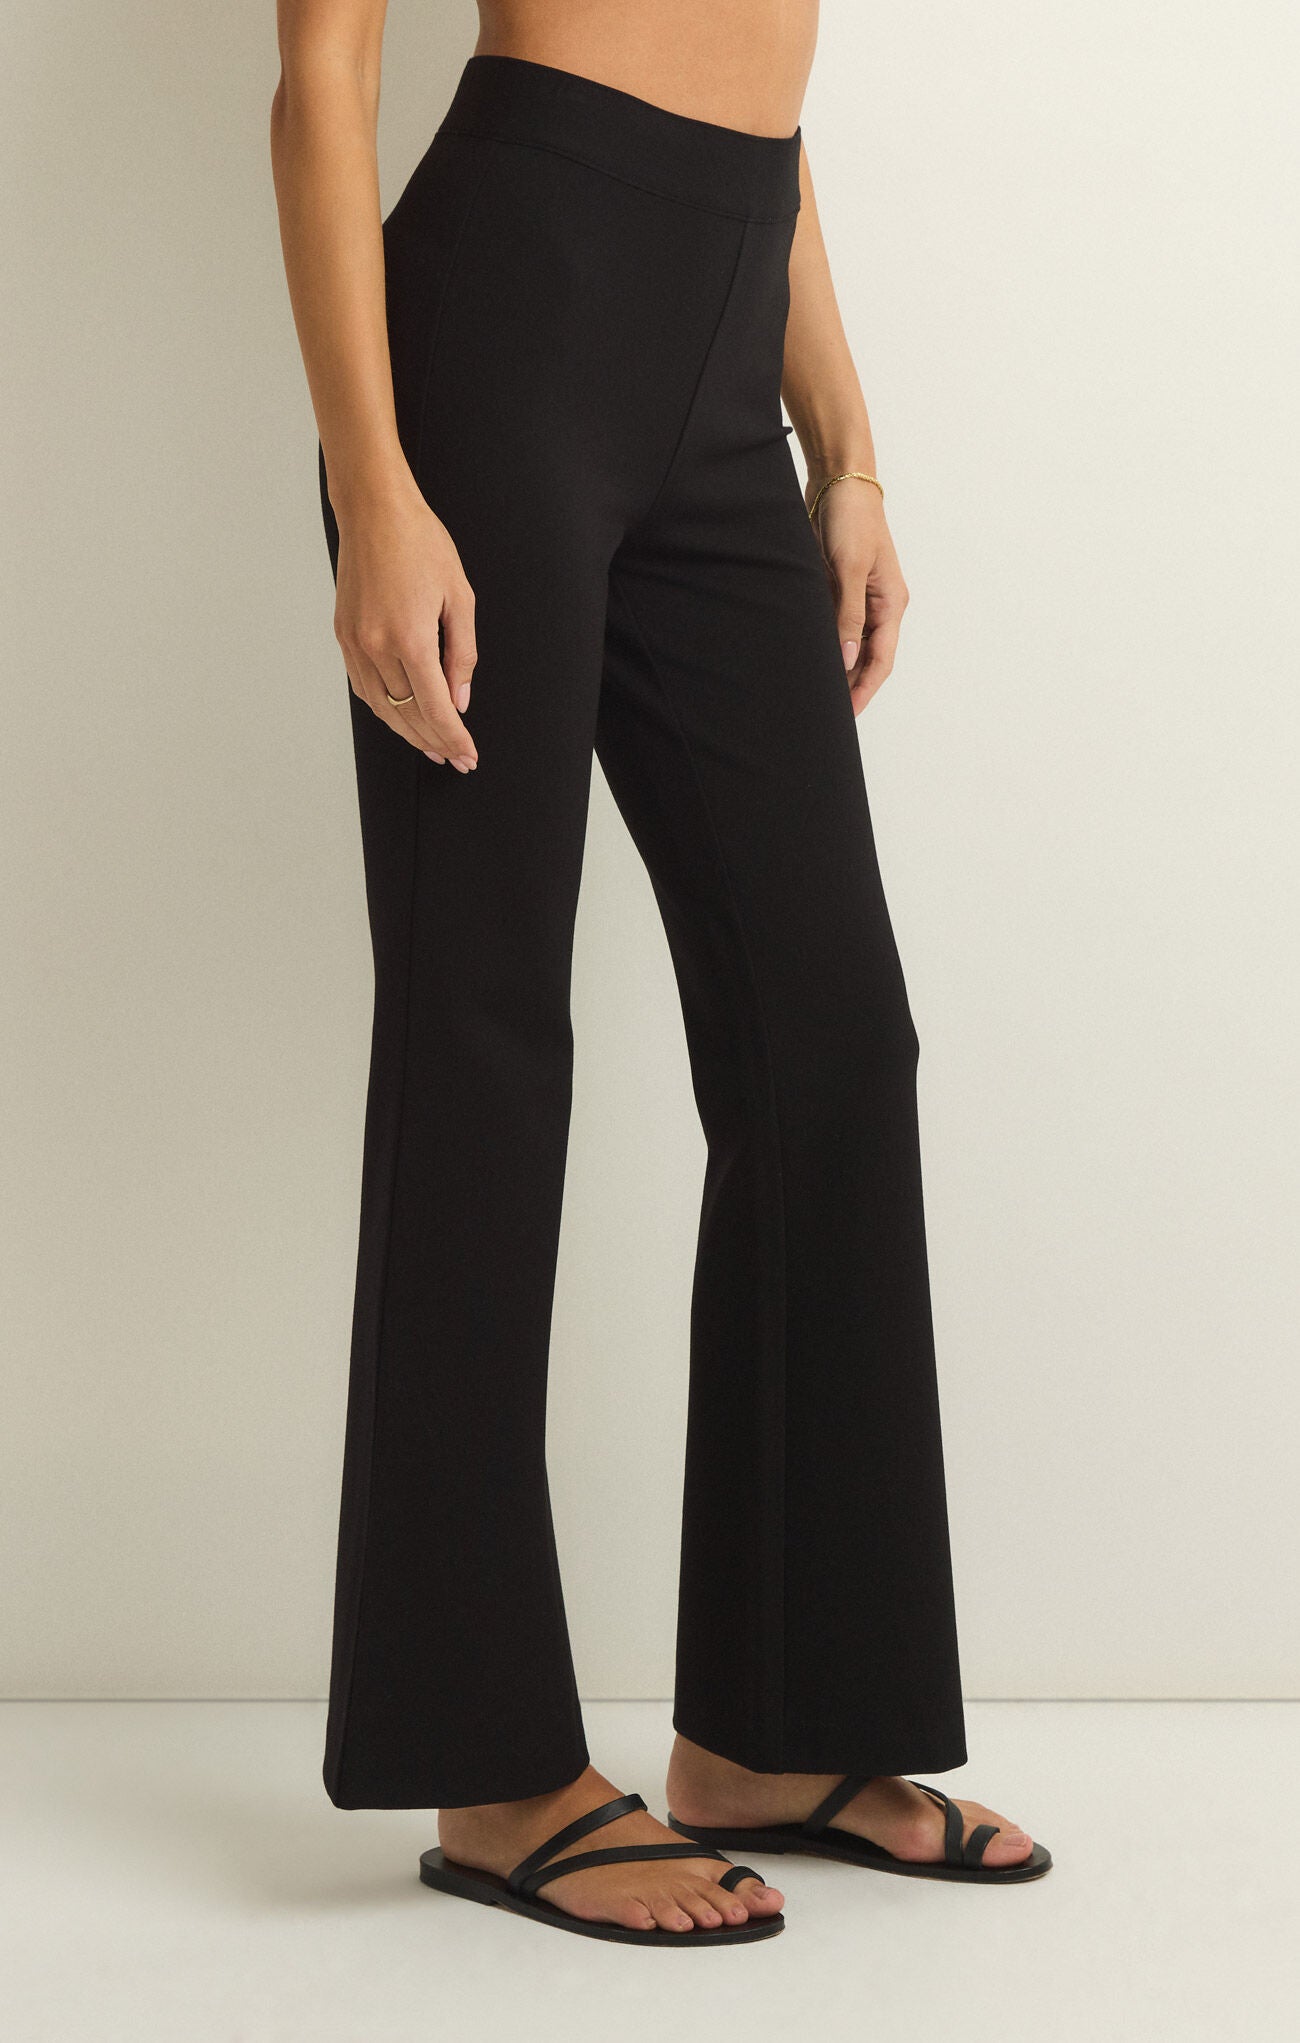 Do It All Flare Pant